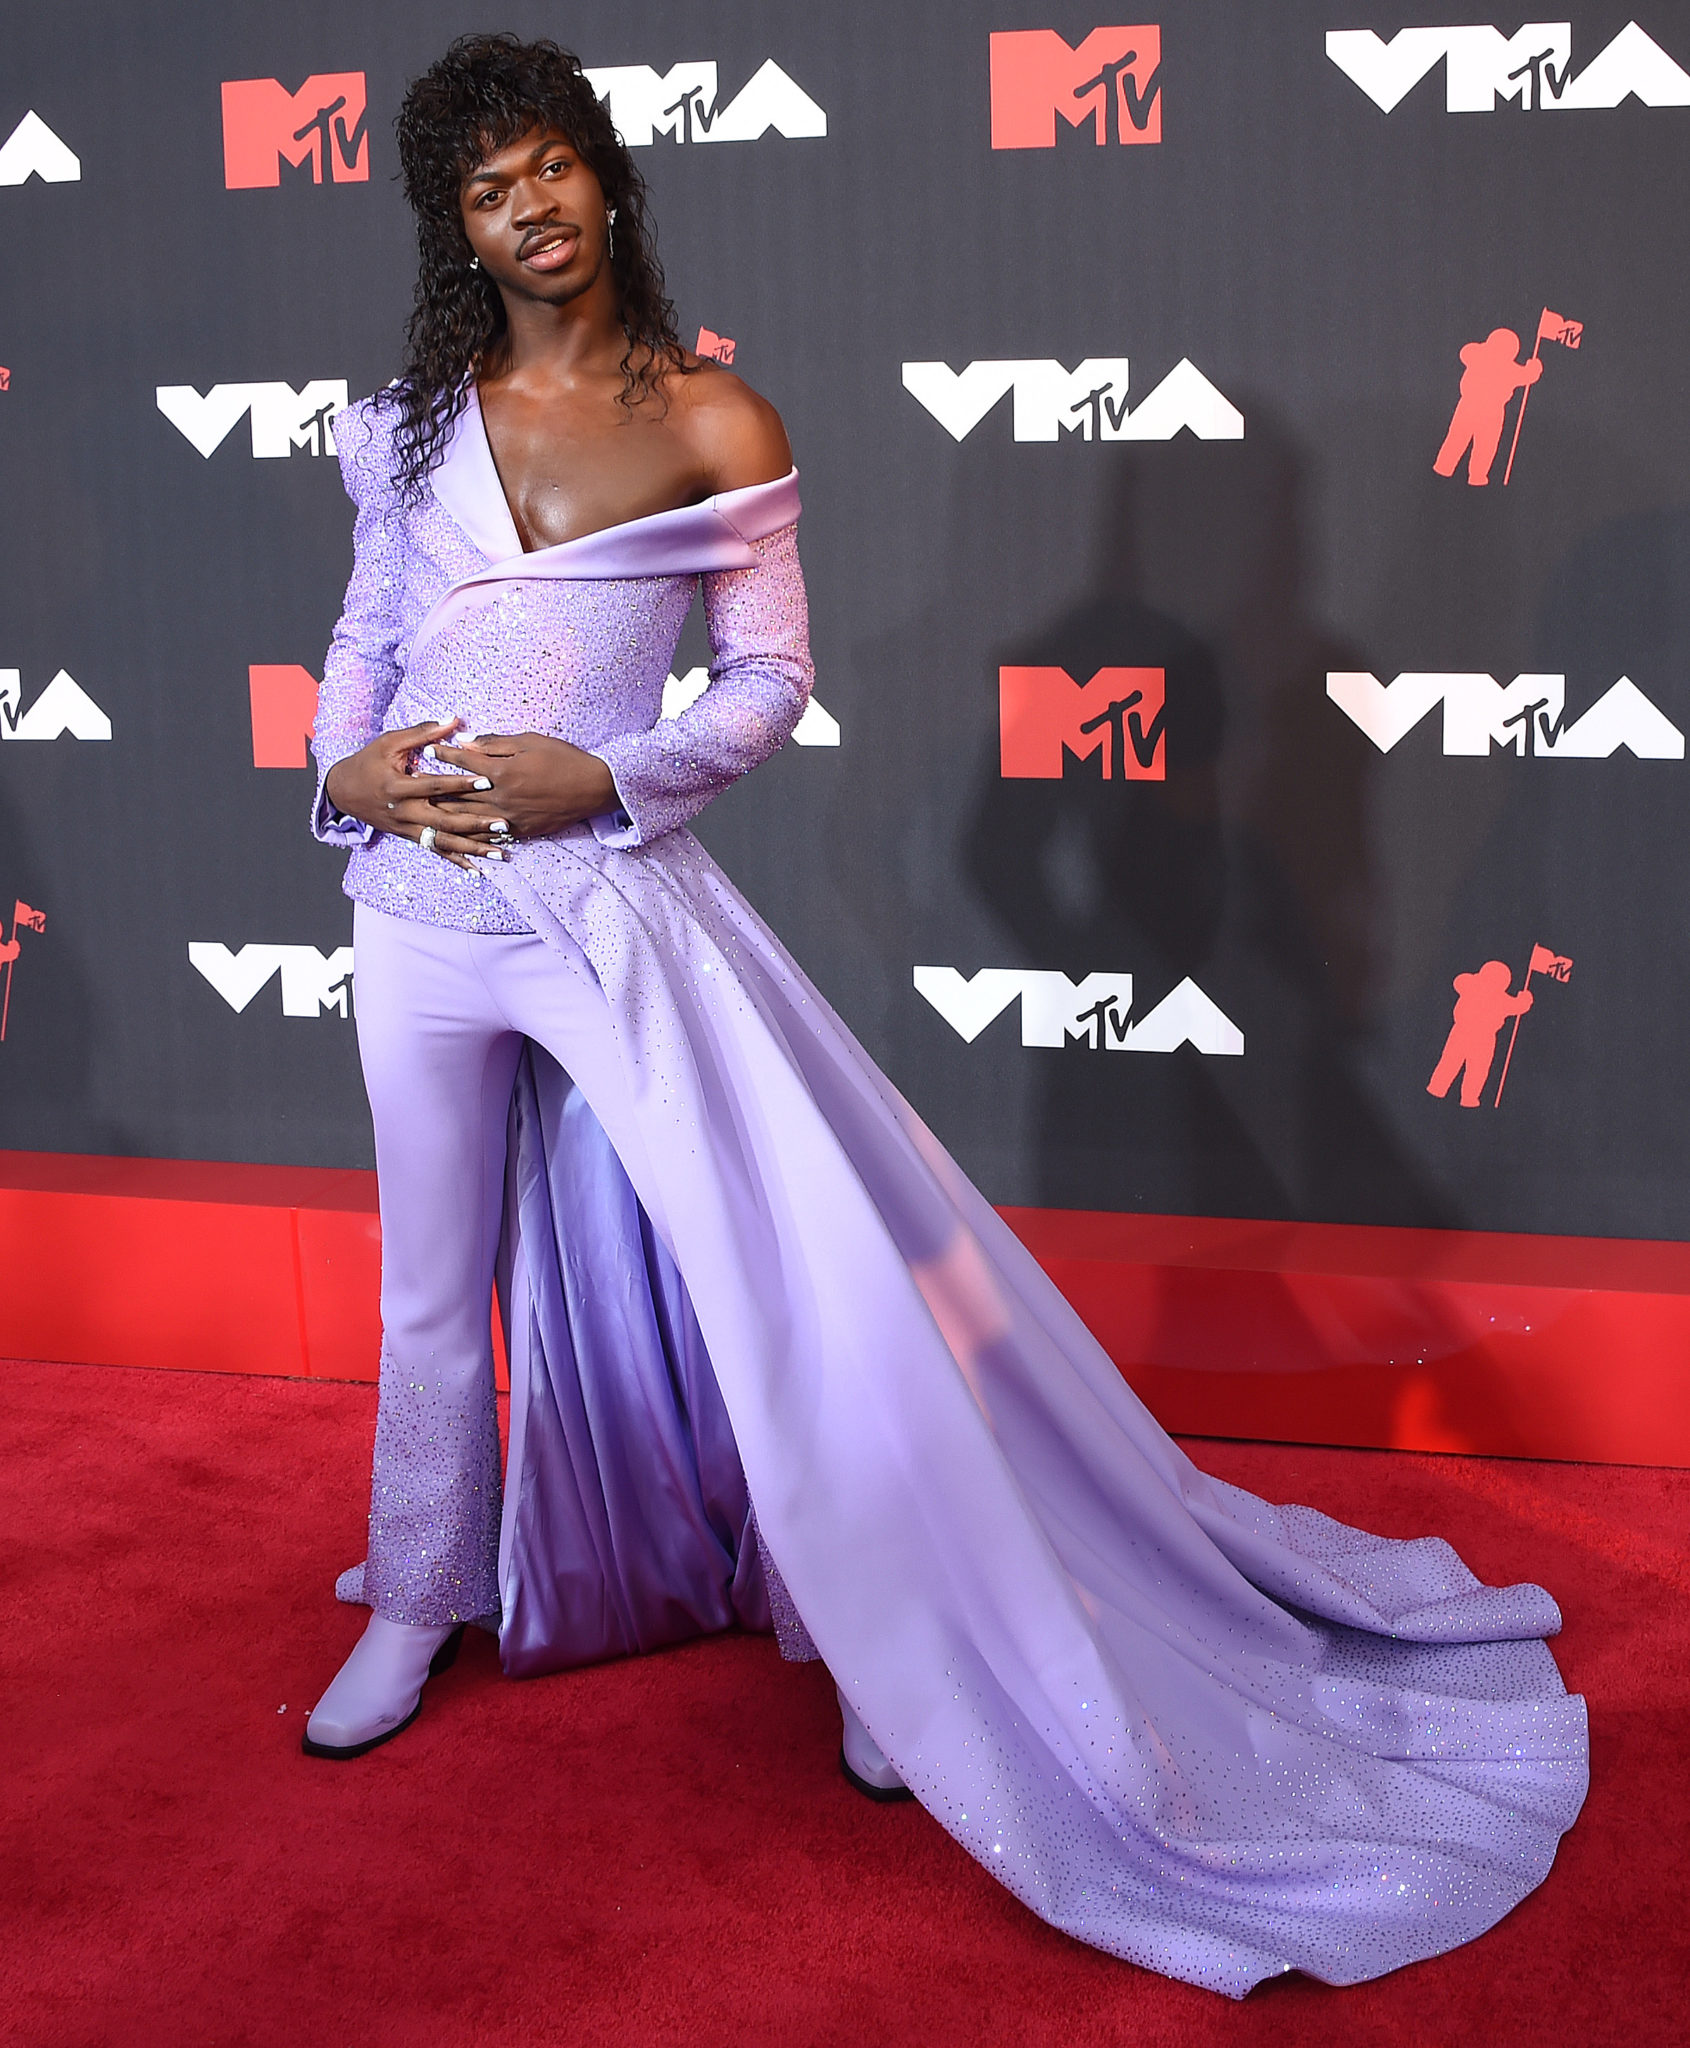 The Most Iconic Looks From Last Night's MTV Video Music Awards